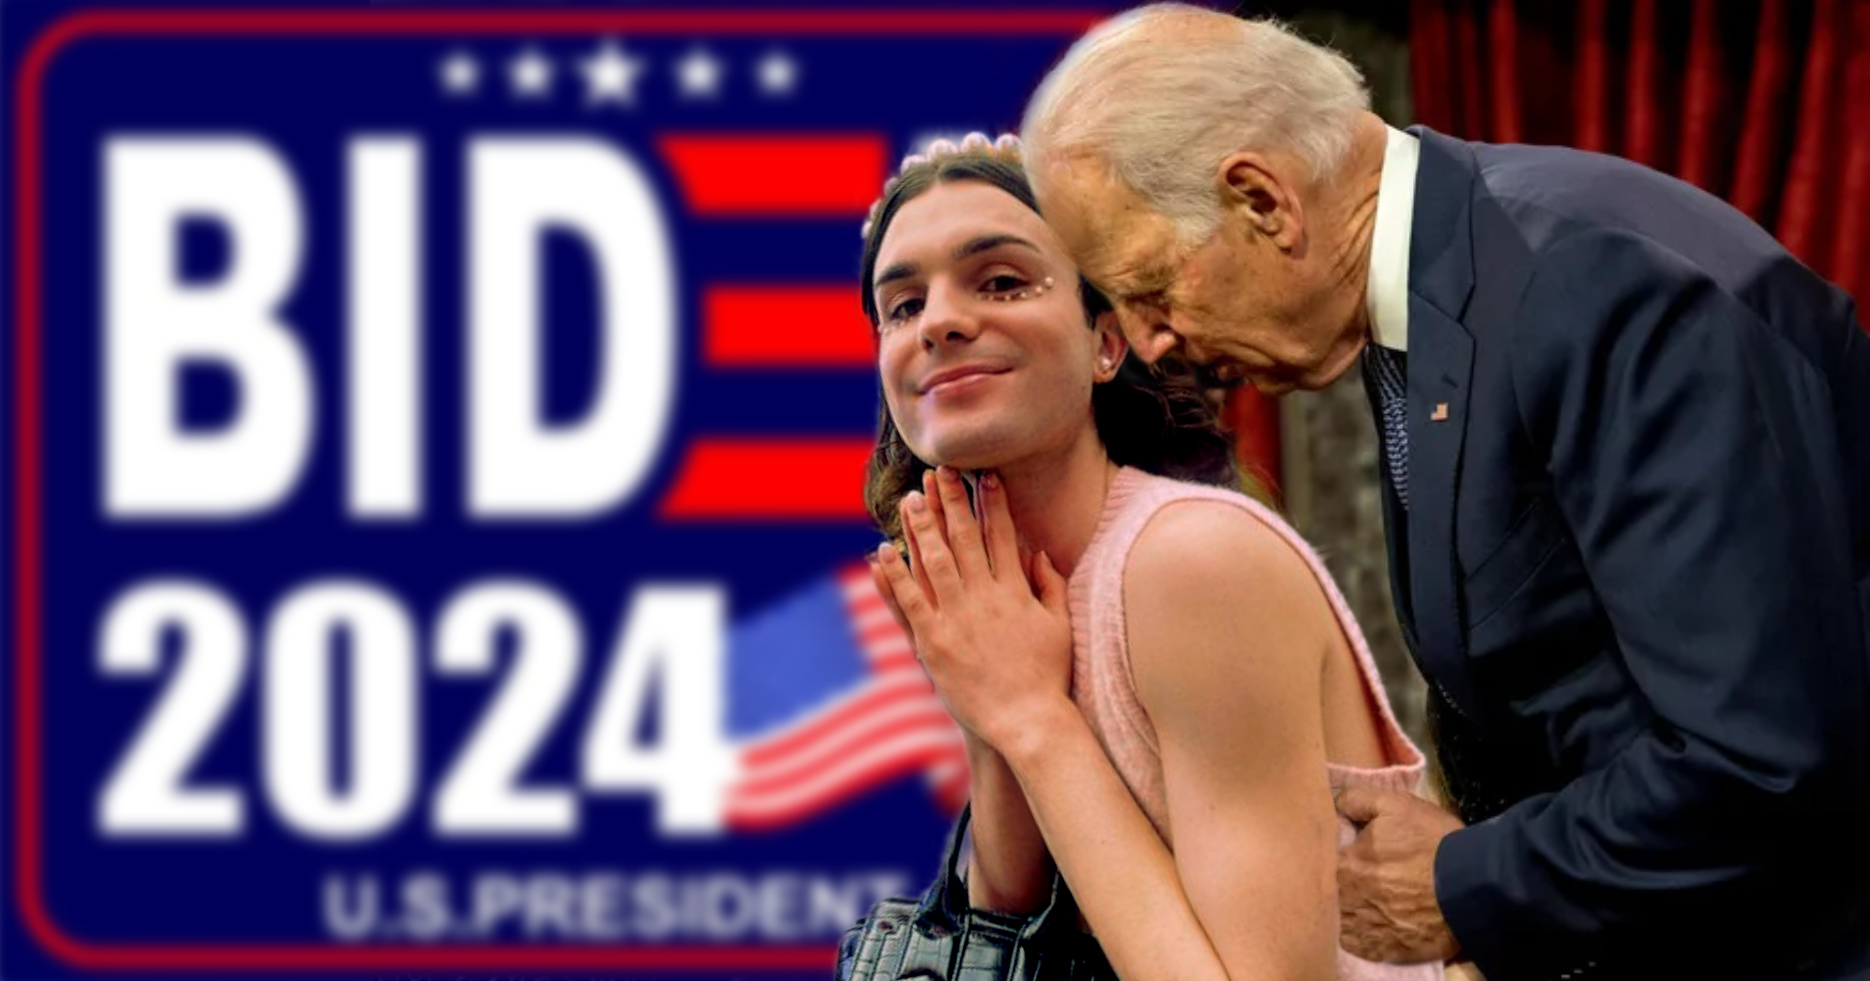 Dylan Mulvaney to be Star of Biden 2024 Campaign Daily Squib